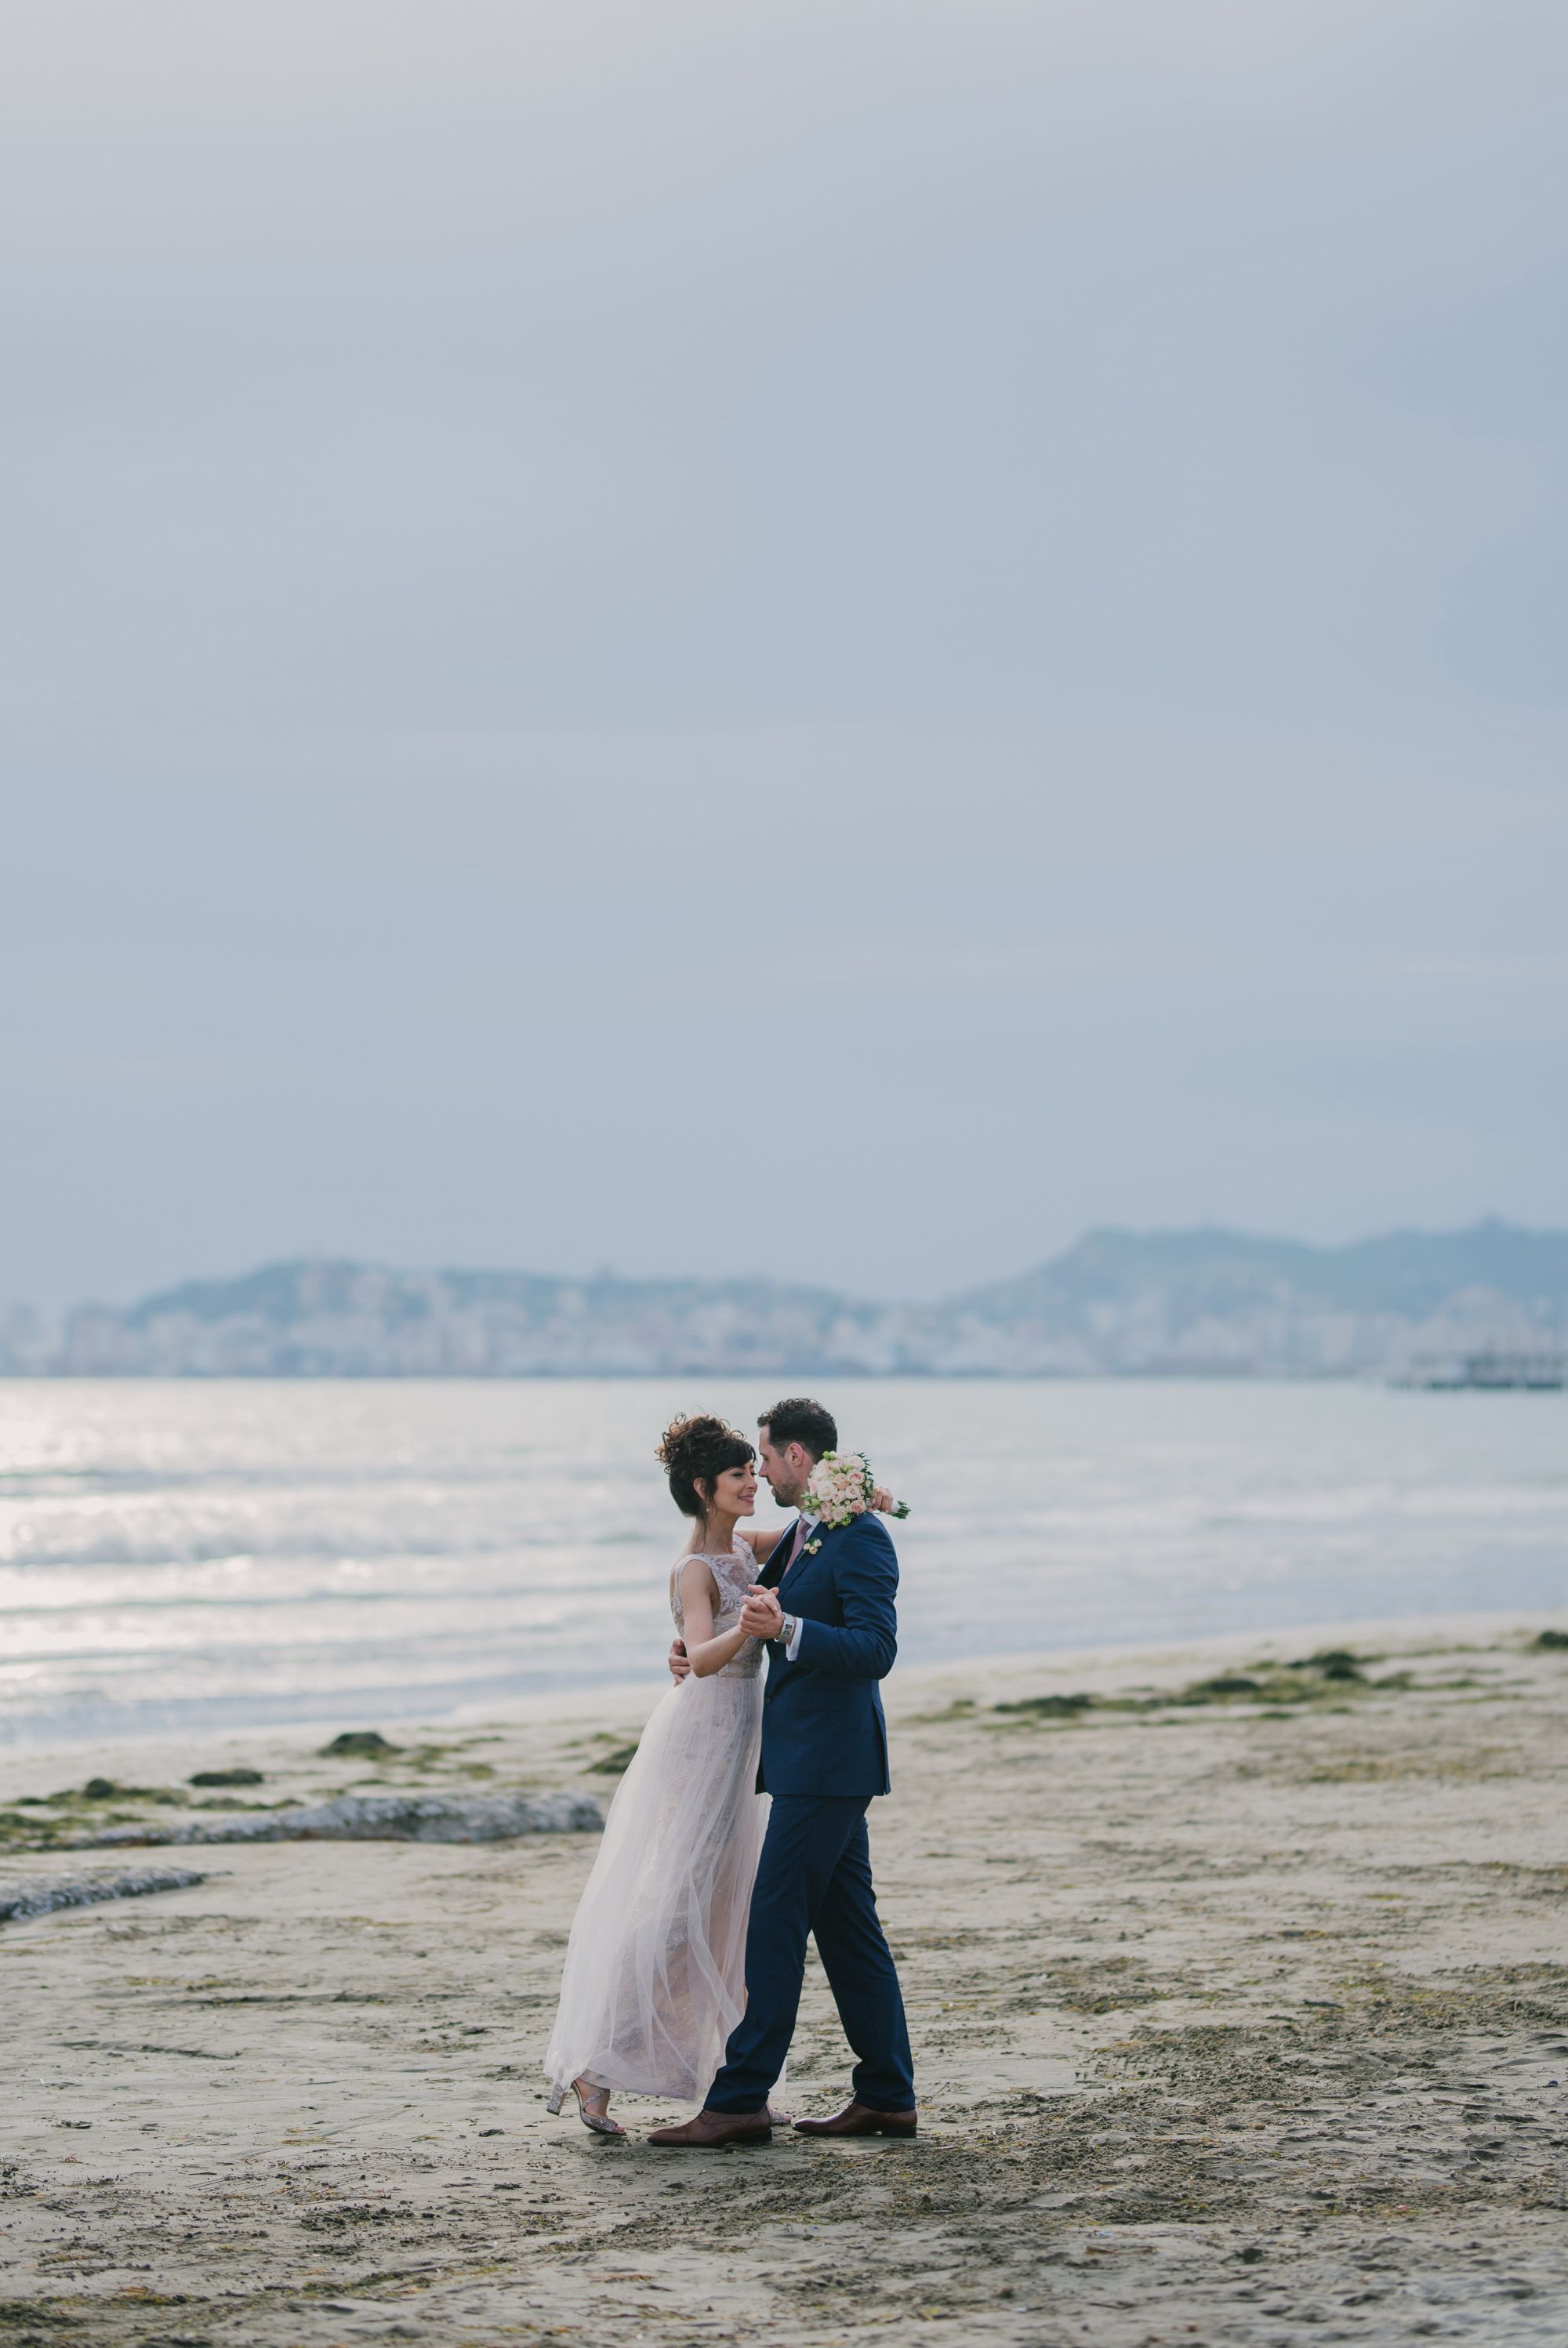 Newlywed bride and groom at the beach.